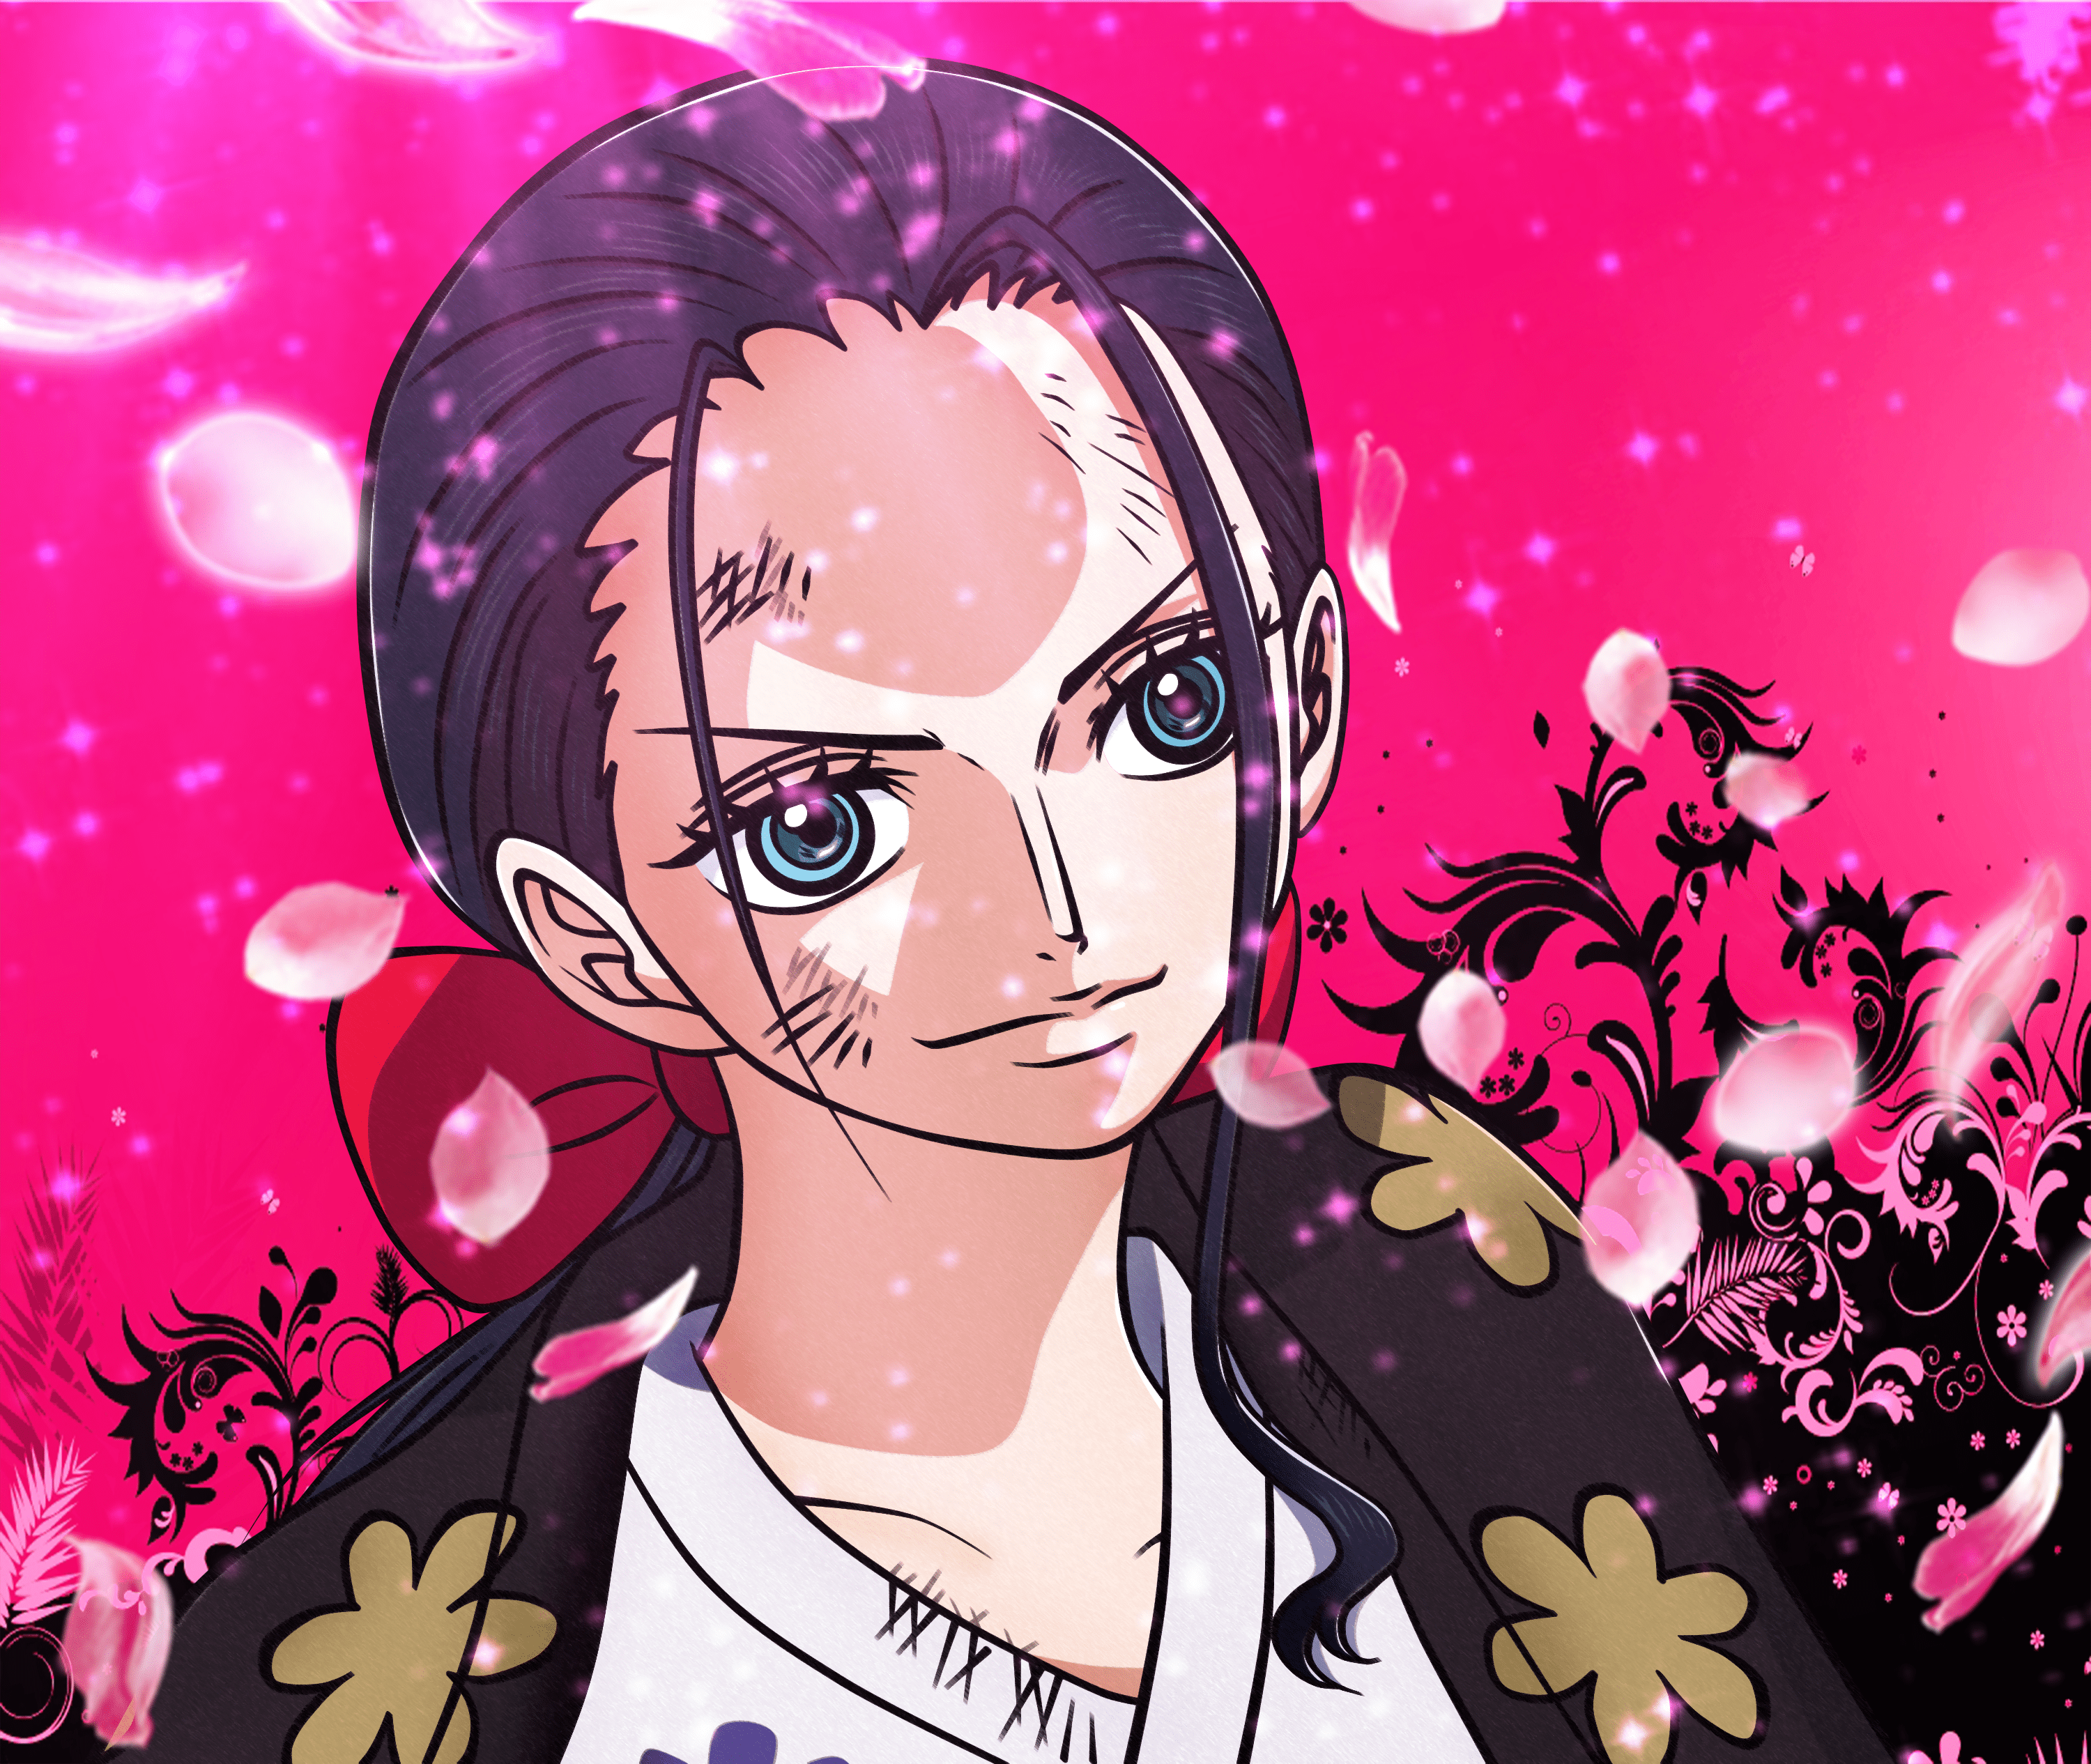 One Piece anime character Roronoa Zoro with cherry blossoms in the background - One Piece